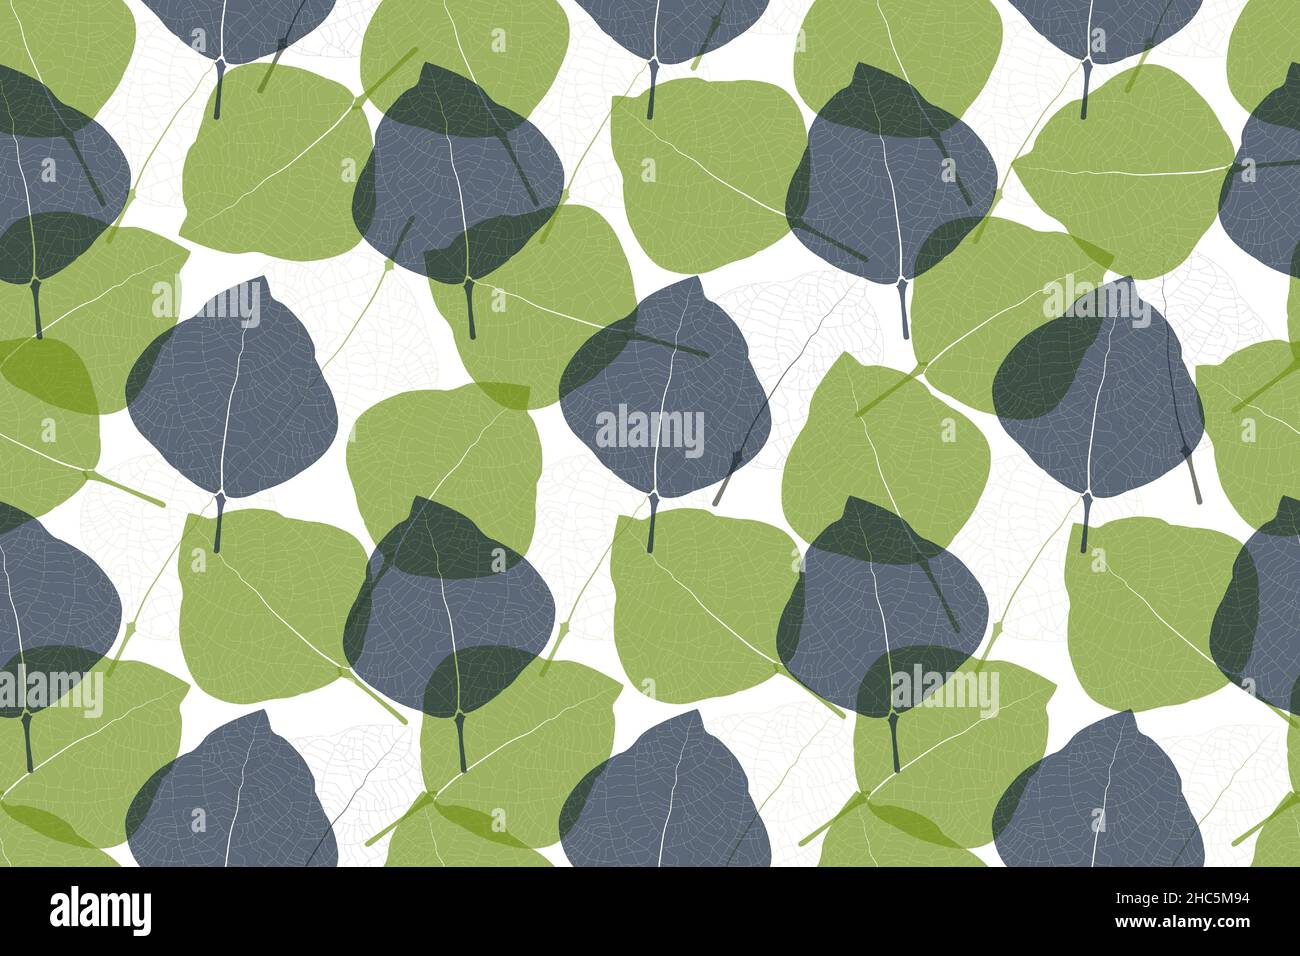 Art floral vector seamless pattern. Overlay leaves Stock Vector